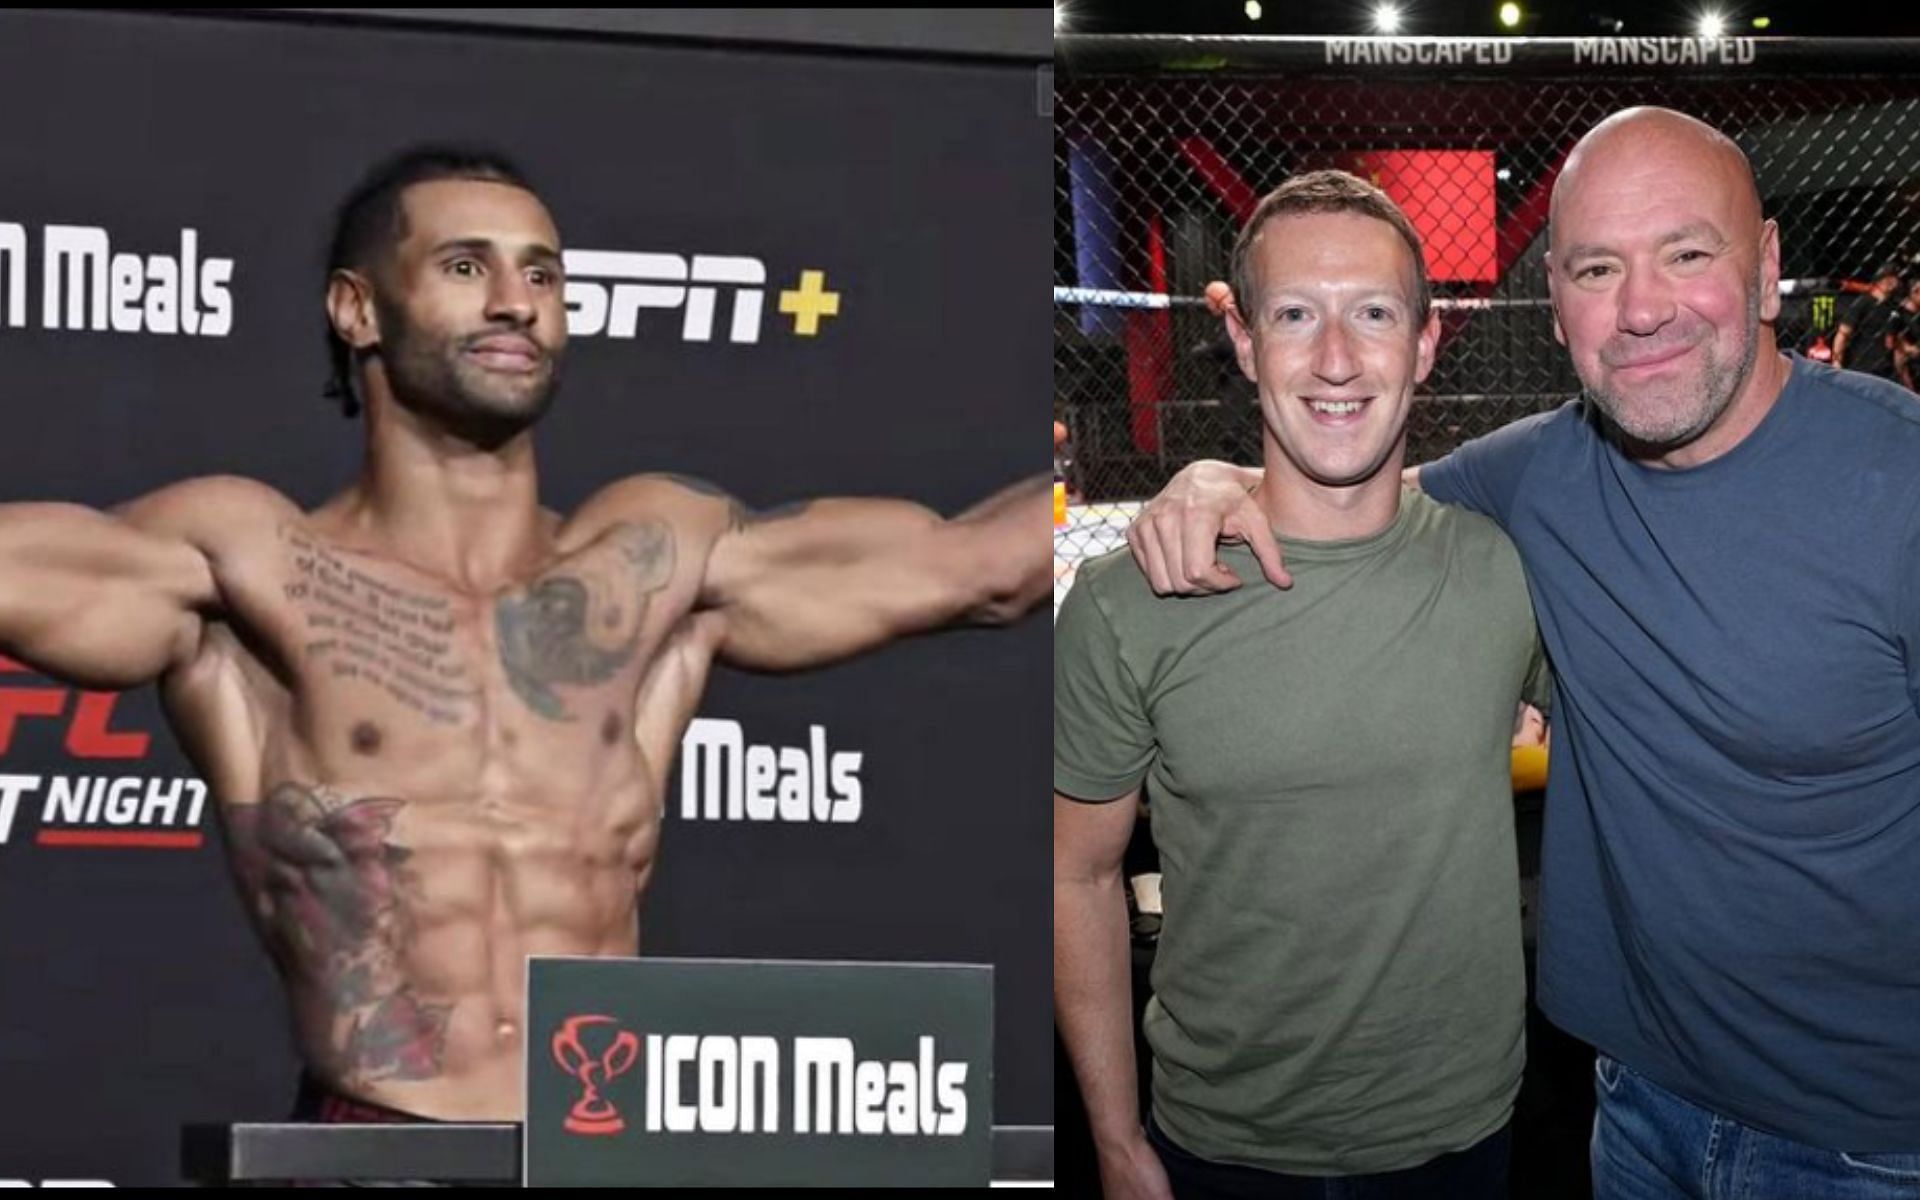 Mike Davis (left) and Mark Zuckerberg and Dana White (right)[Images courtesy: @mikedavismma and @ufc on Instagram]